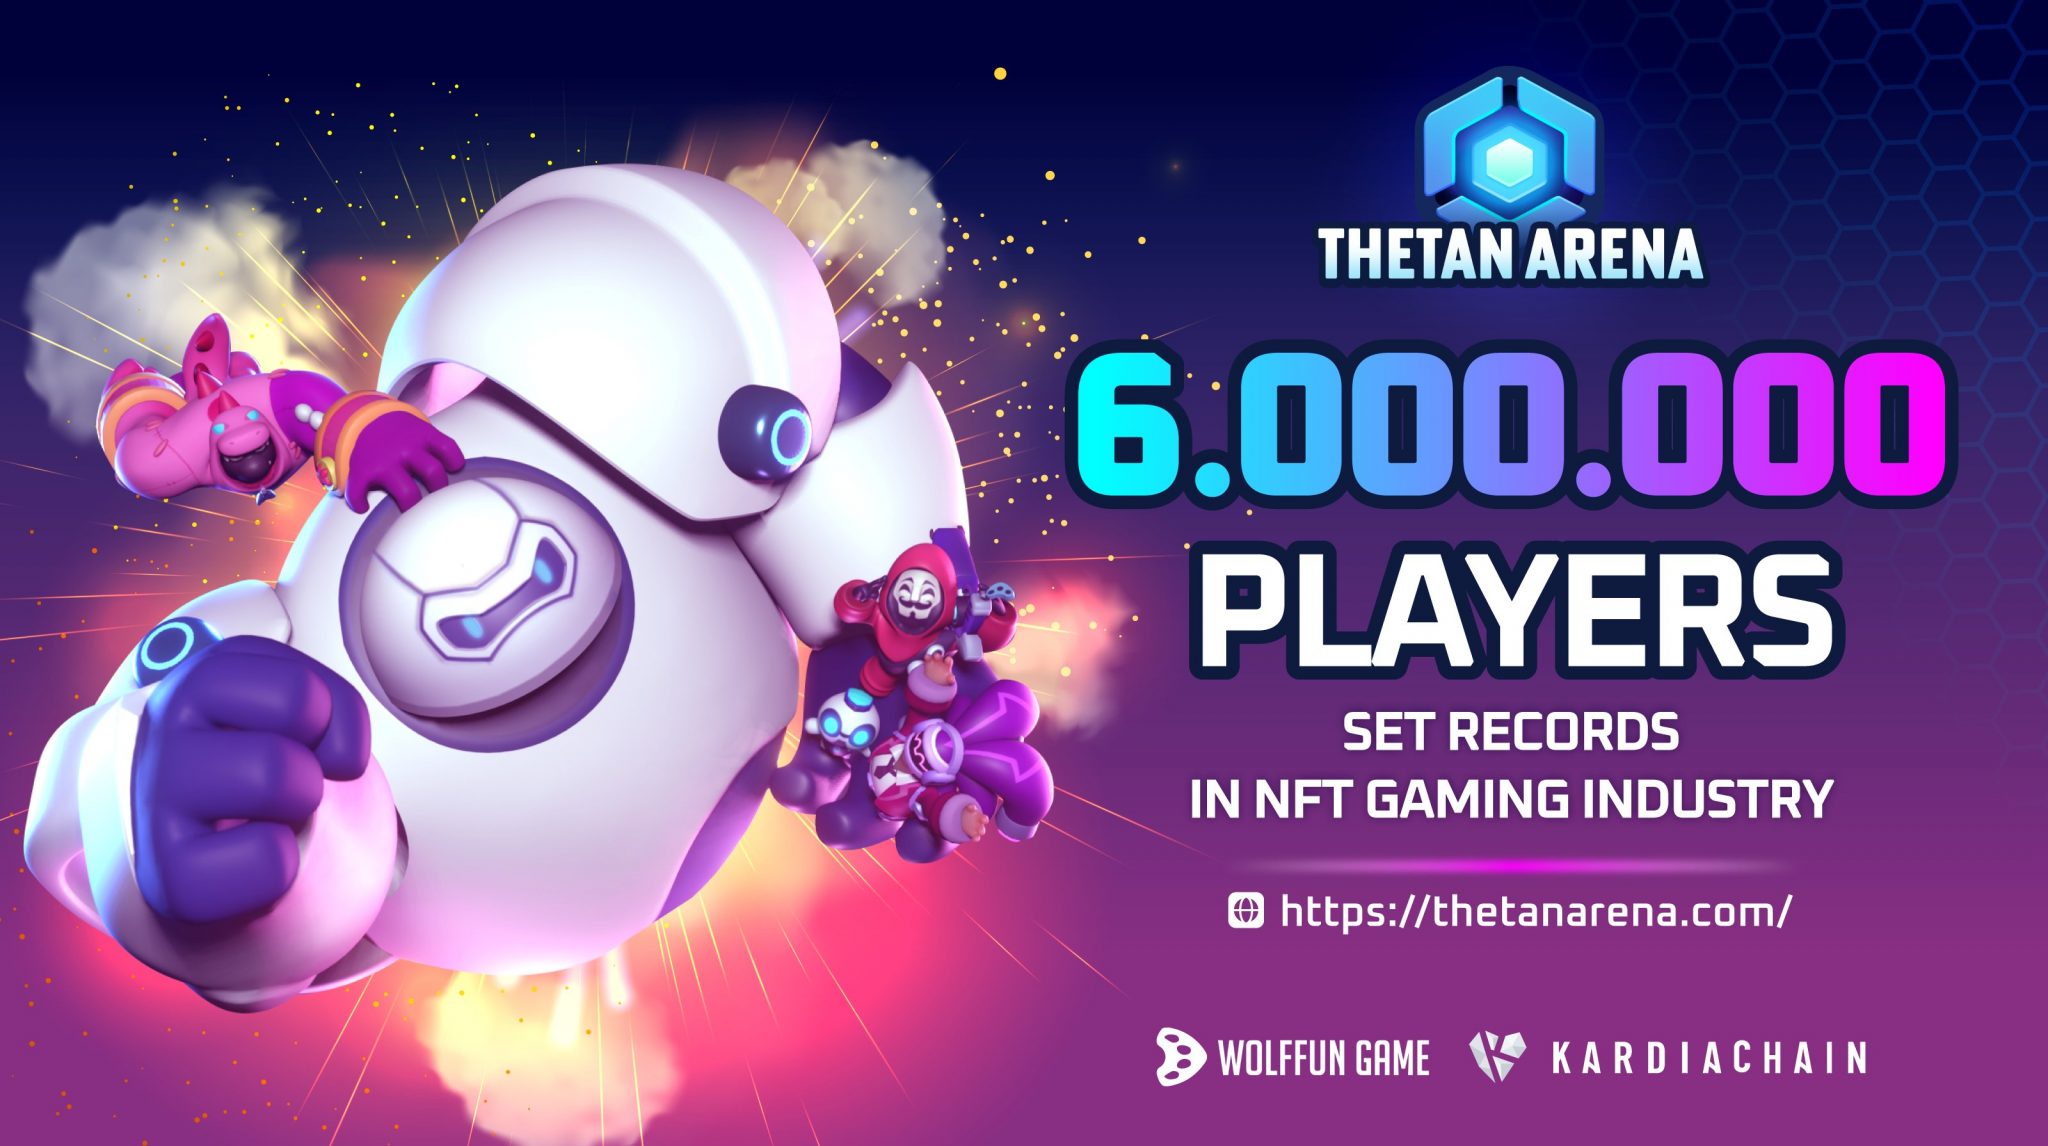 Thetan Arena Gains 6 Million Players 2 Weeks After Launch, Sets New NFT Record